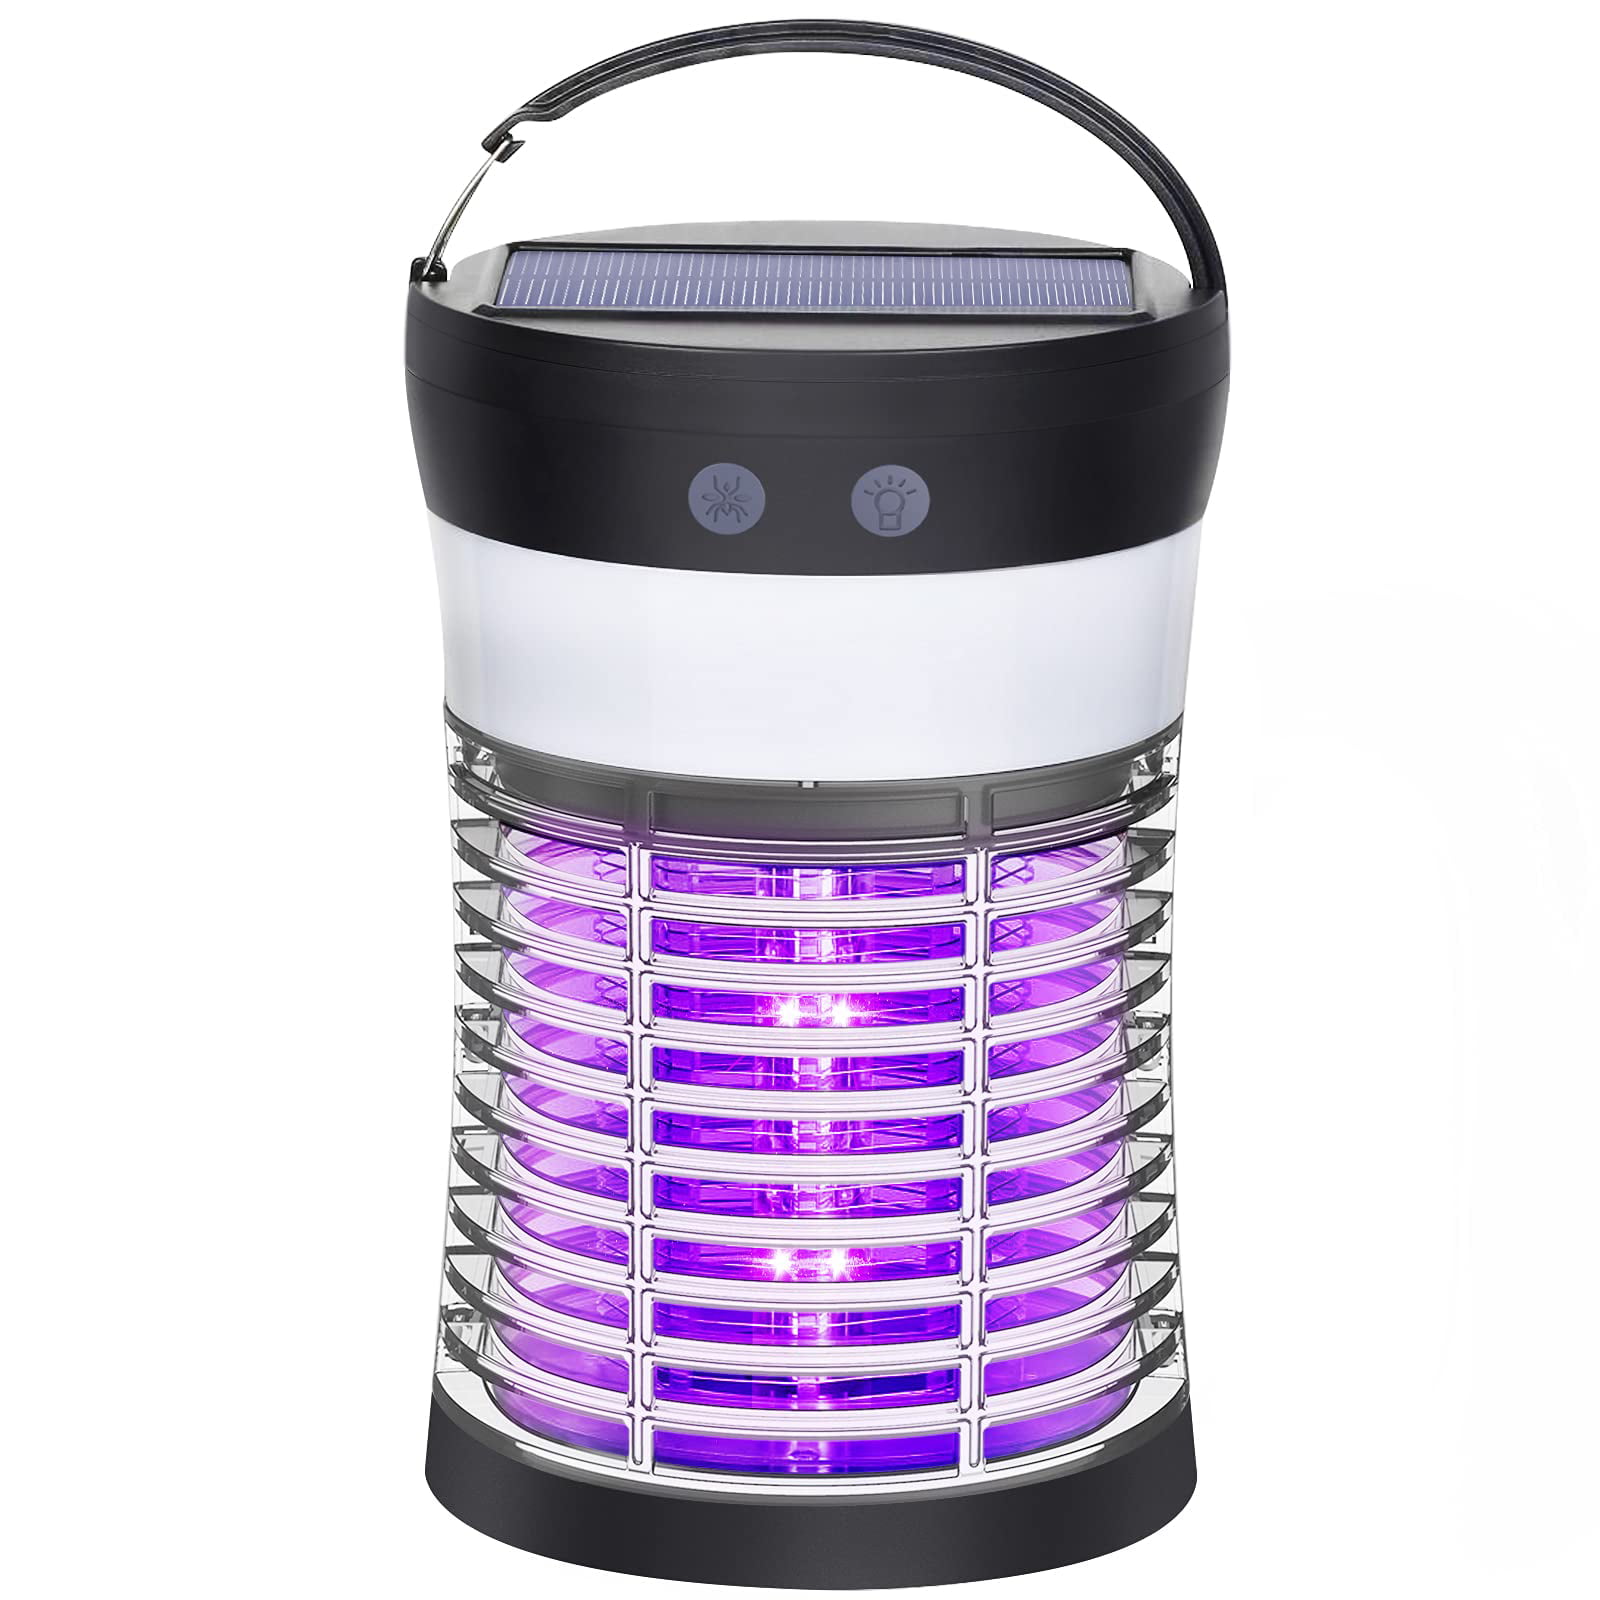 Details about   OKK Portable Electronic Indoor Insect Killer Powerful Bug Zapper with 10 Hour... 